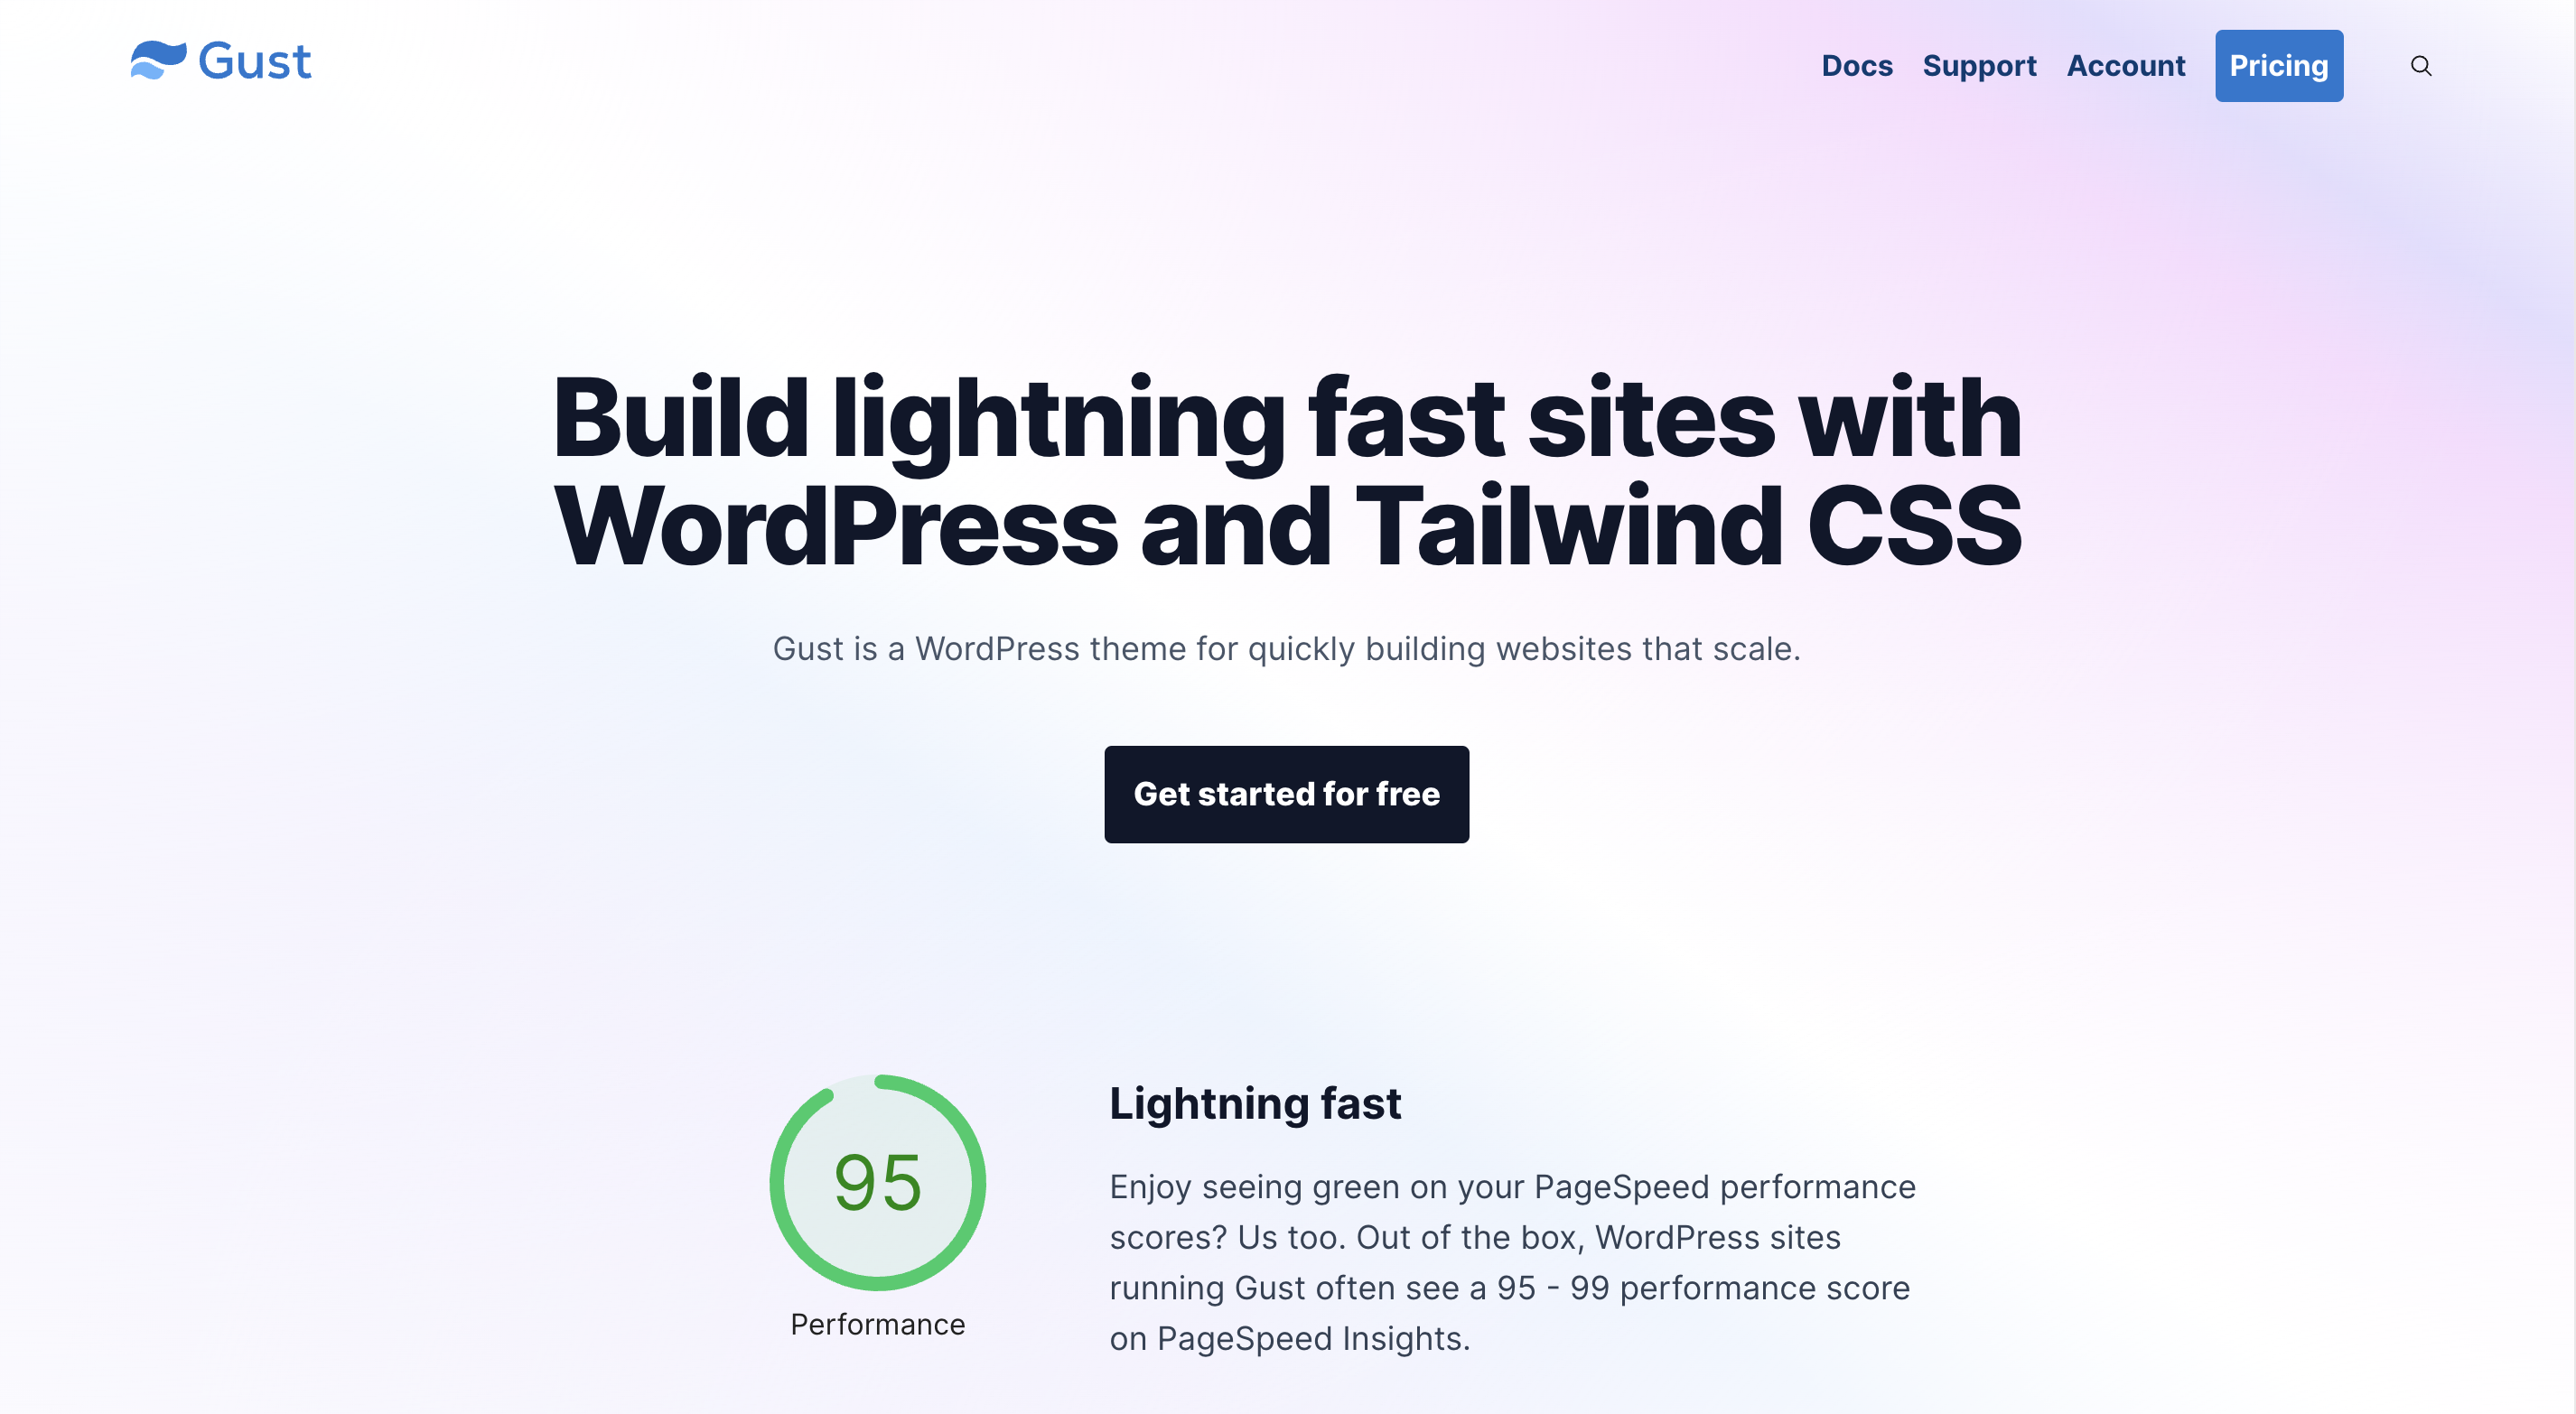 Gust - Tailwind CSS for WordPress